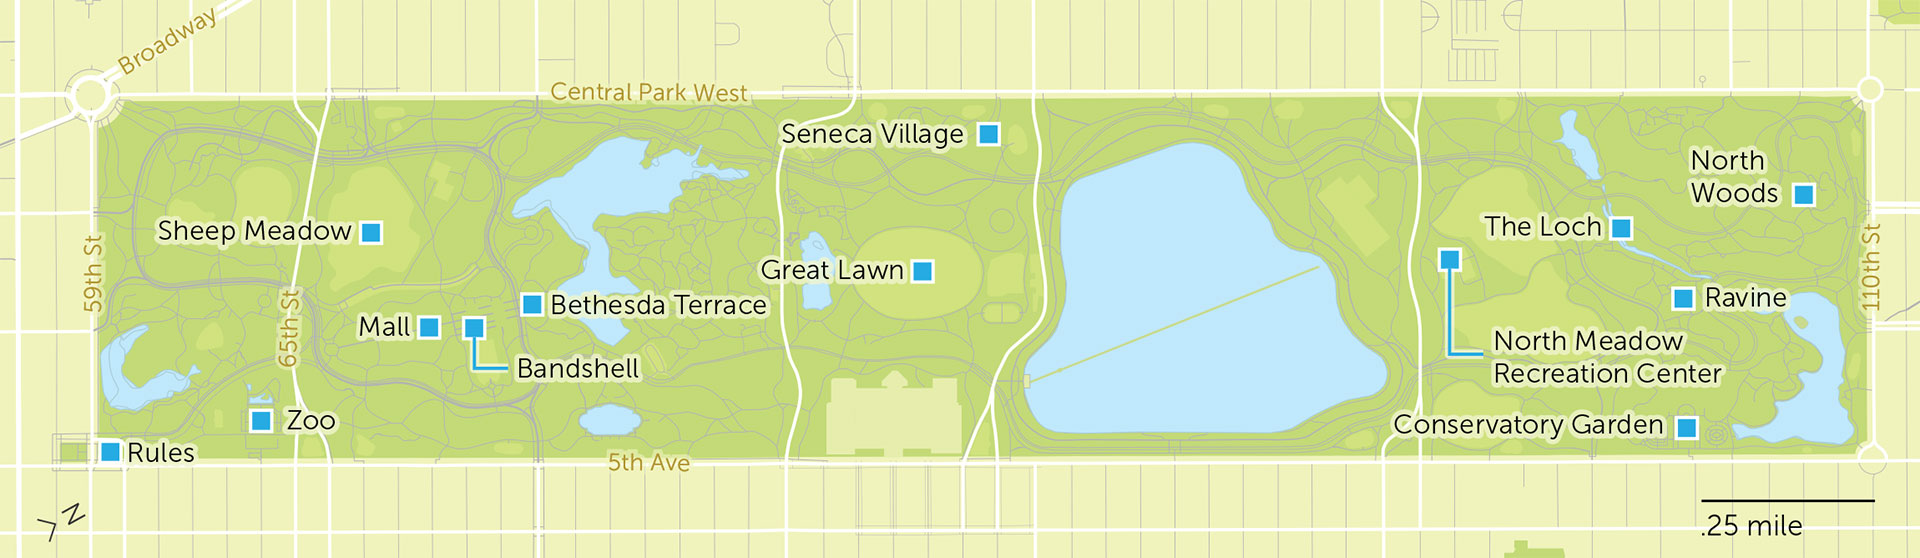 Map of sites in Central Park